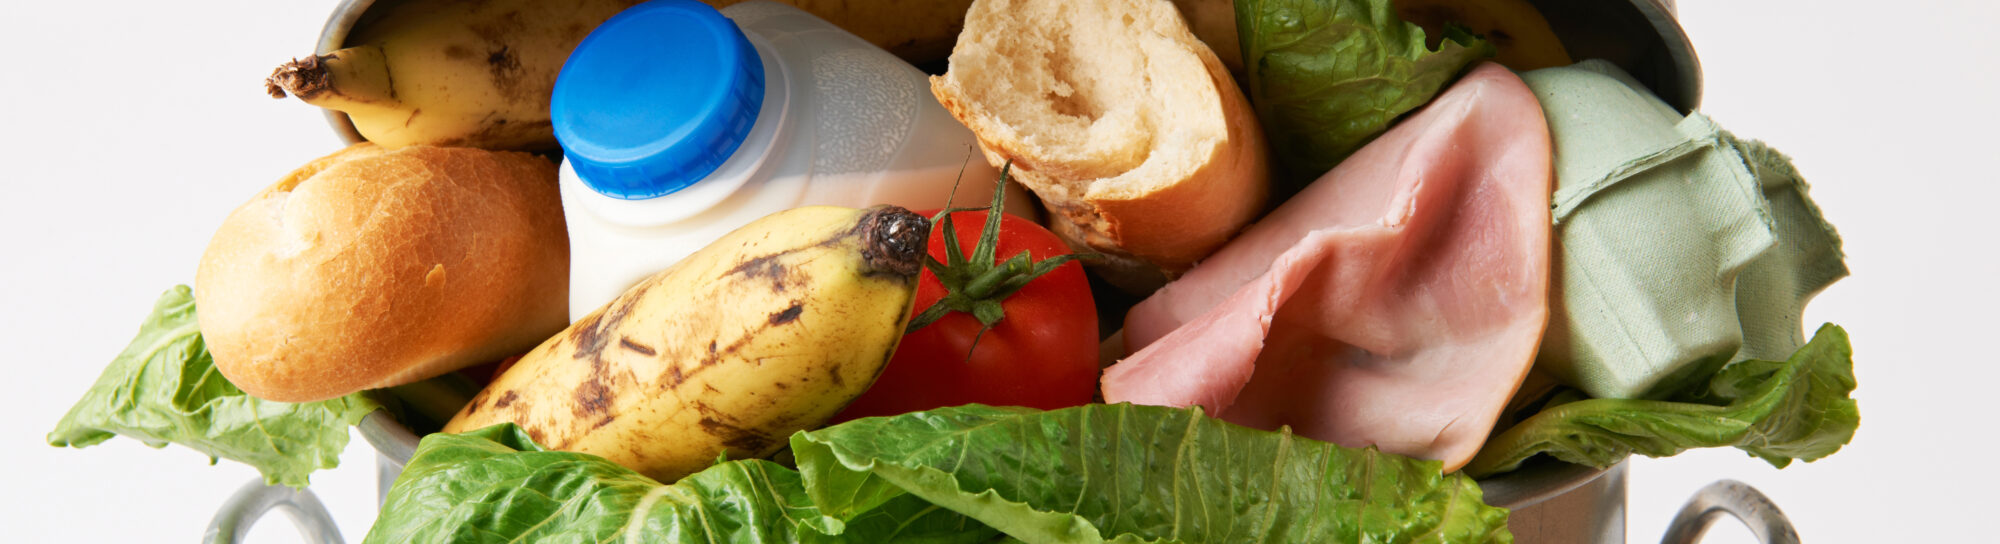 Food waste is harmful to the environment and to the wallet